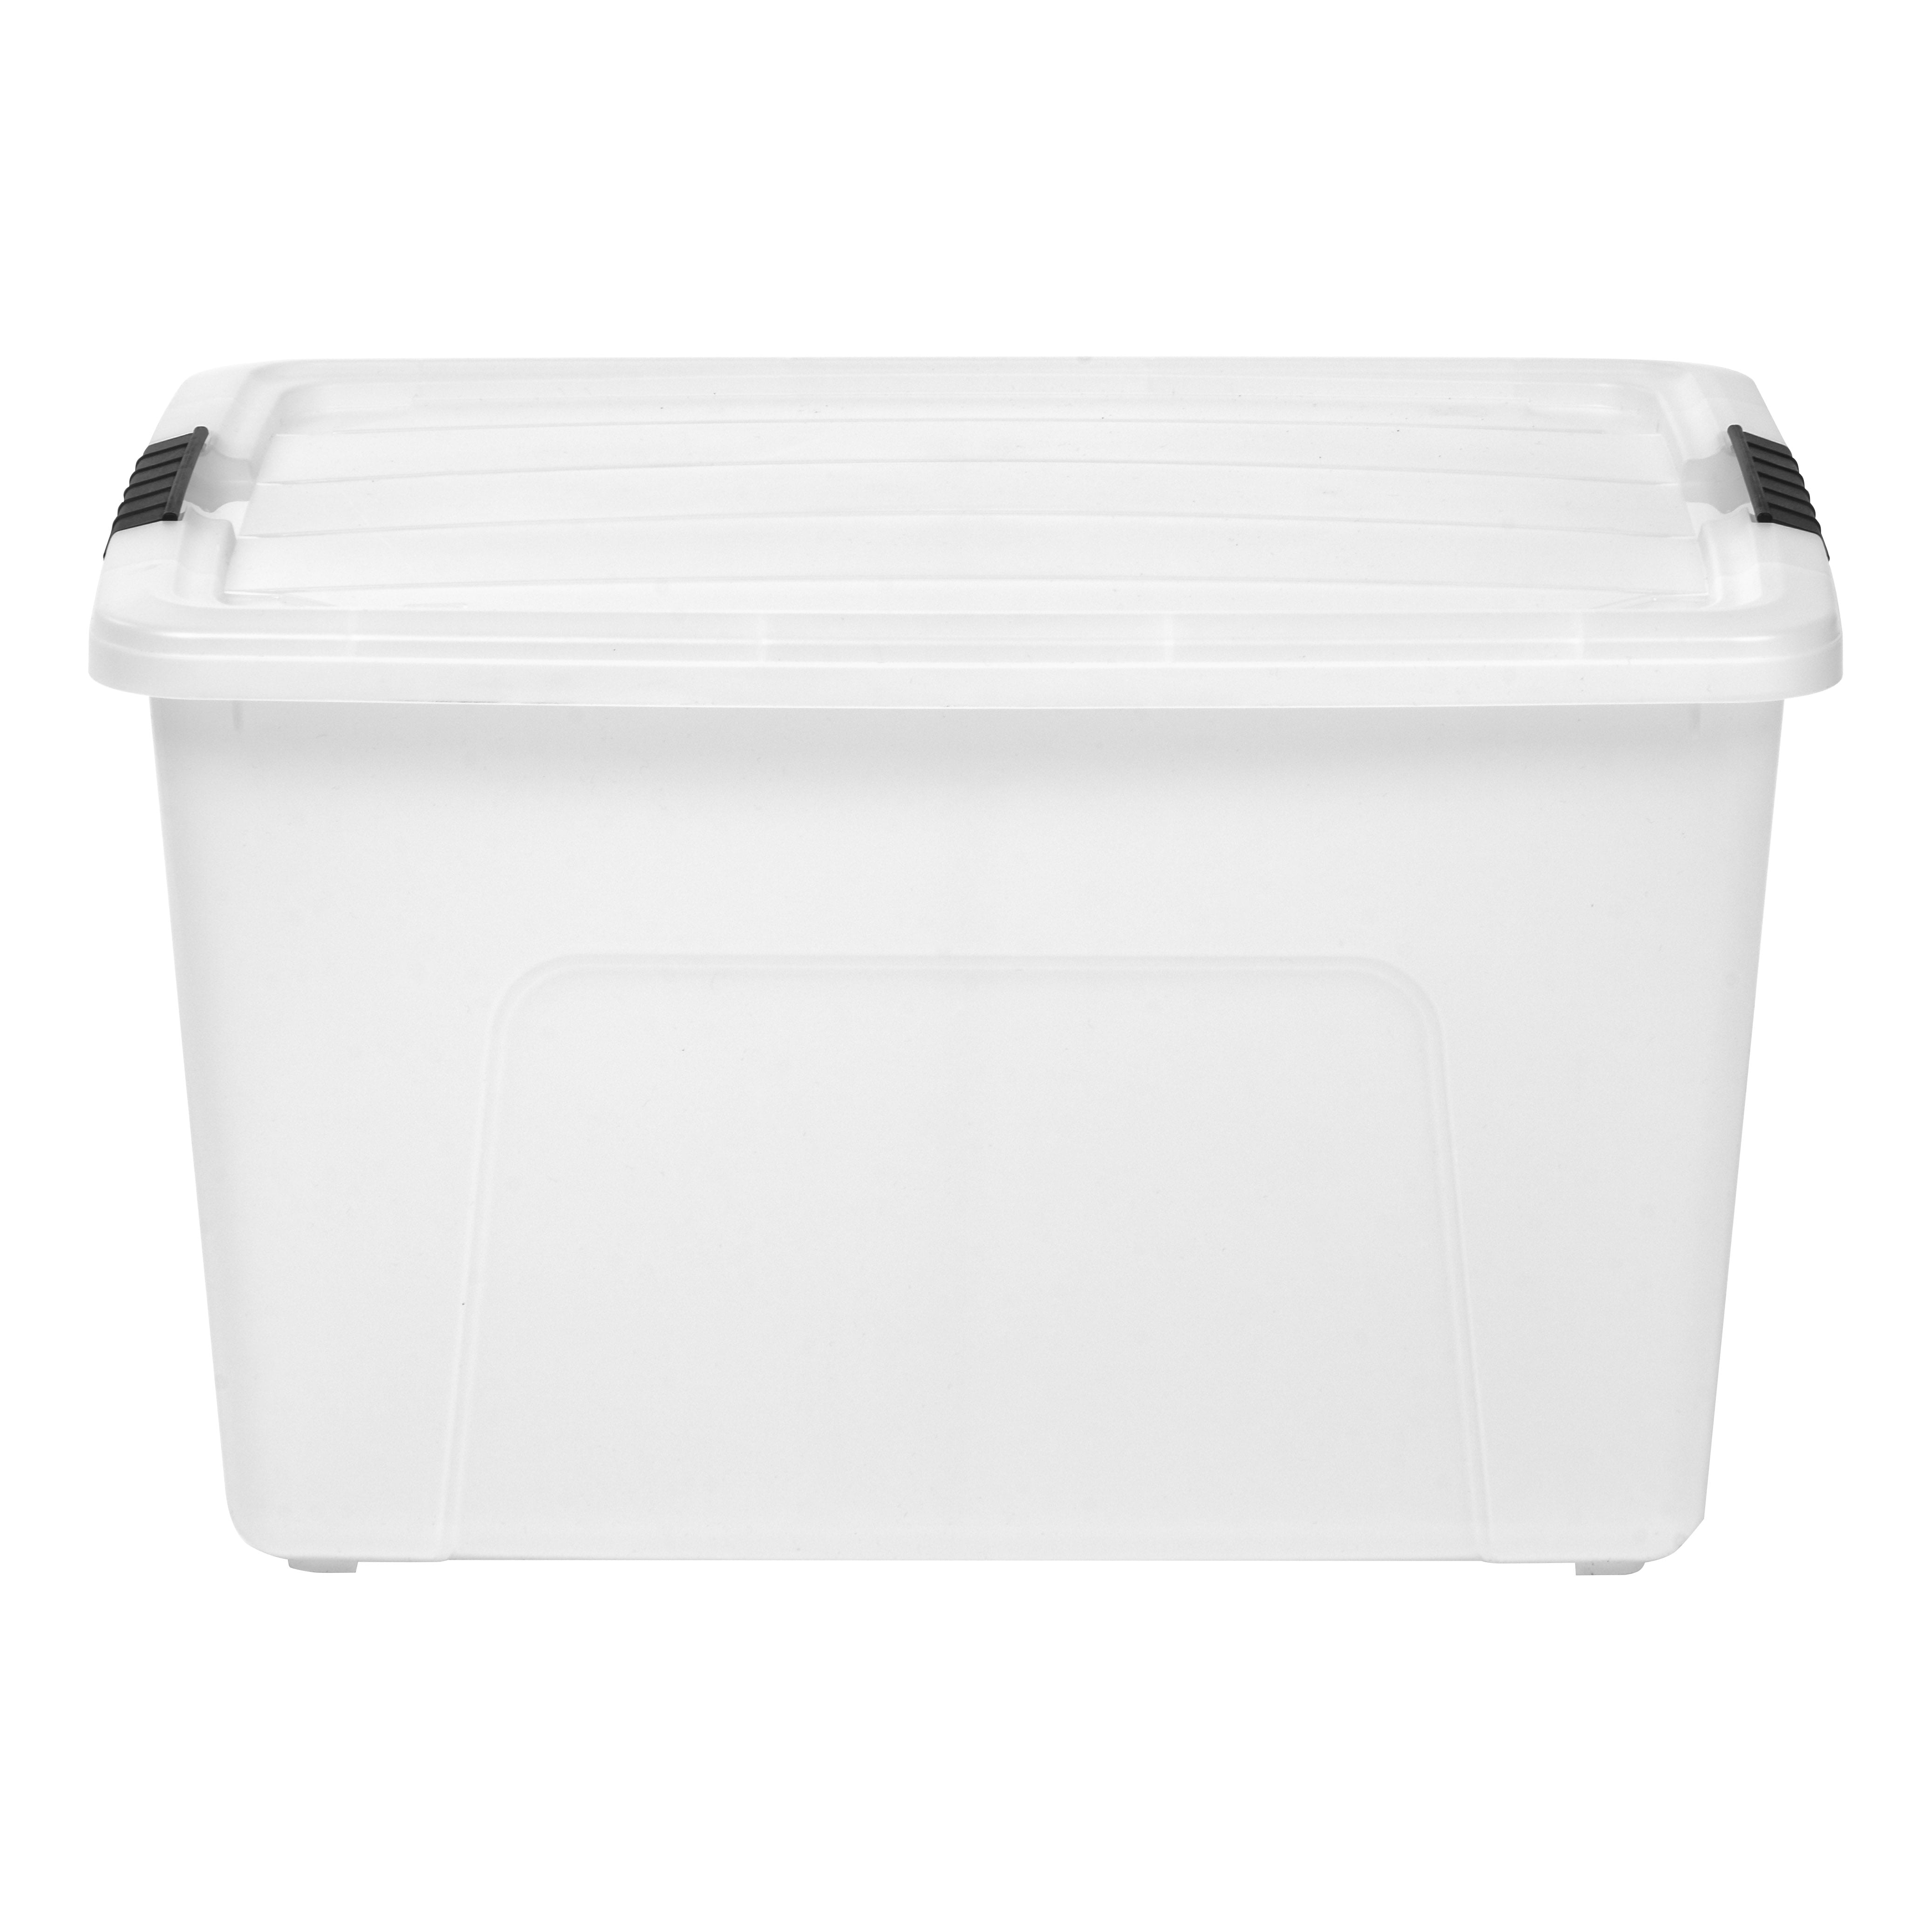  BTSKY Plastic Container Box with Lid, Car, Kitchen  Organizing(Clear White)